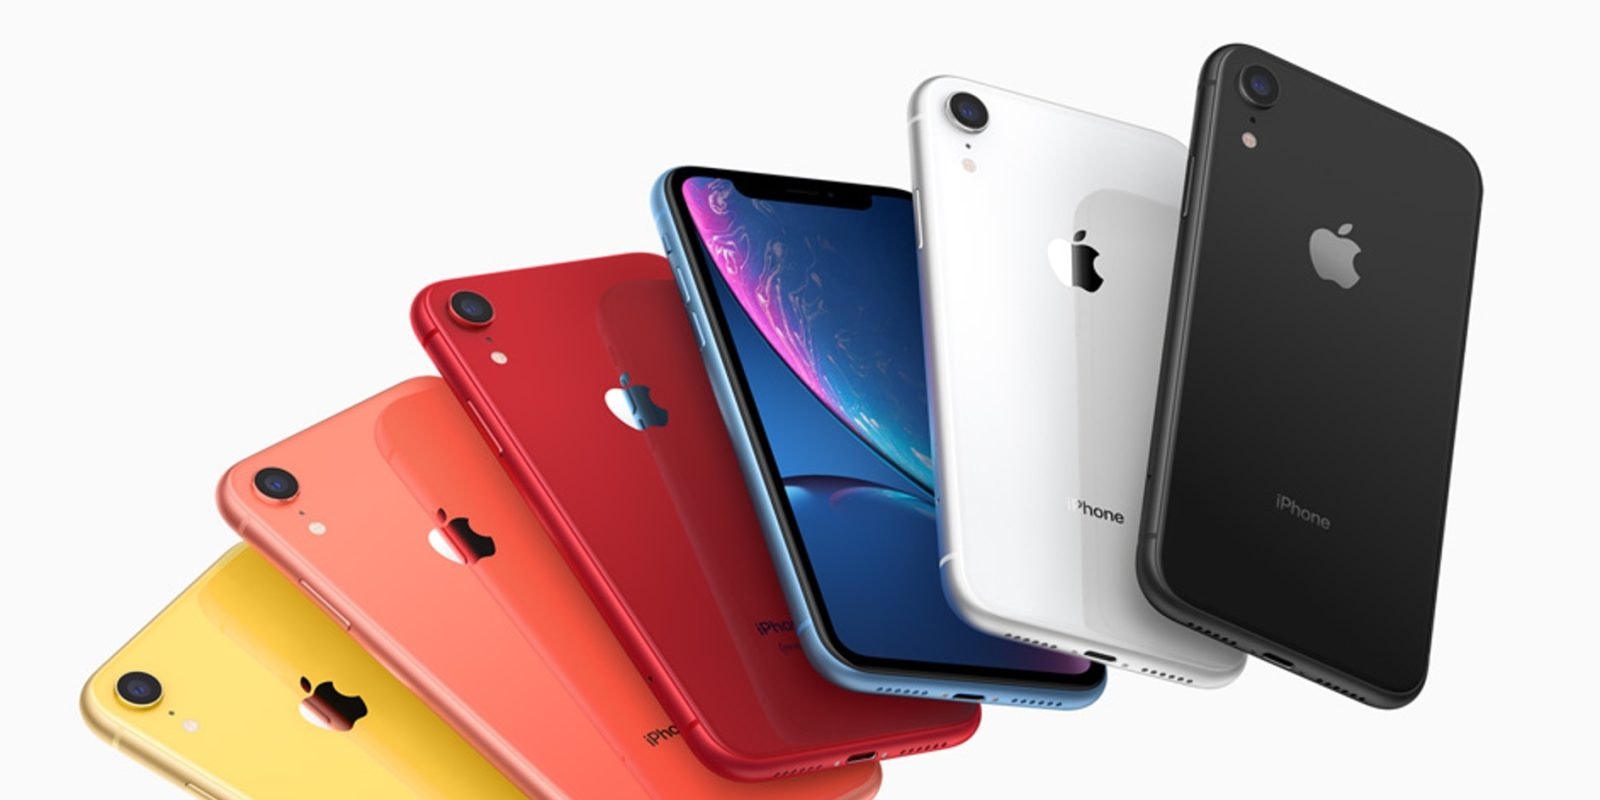 which iphone 11 color should i get